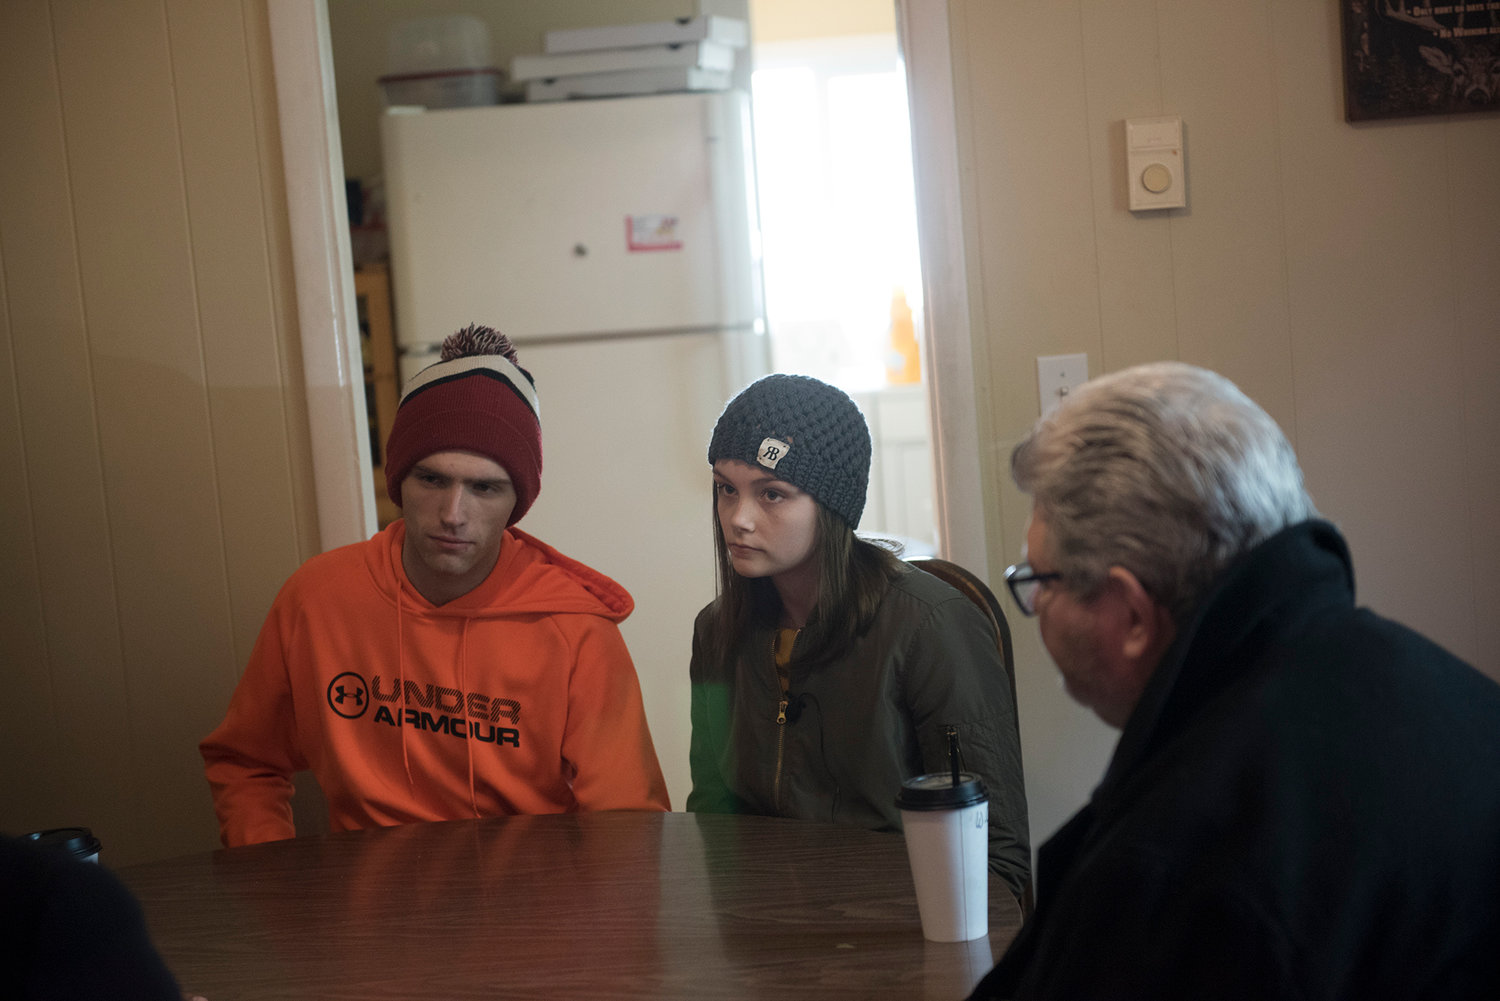 George Payne (left) and Sam Moyer (right) sit for an interview inside the house Nancy Moyer lived at the time of her disappearance.